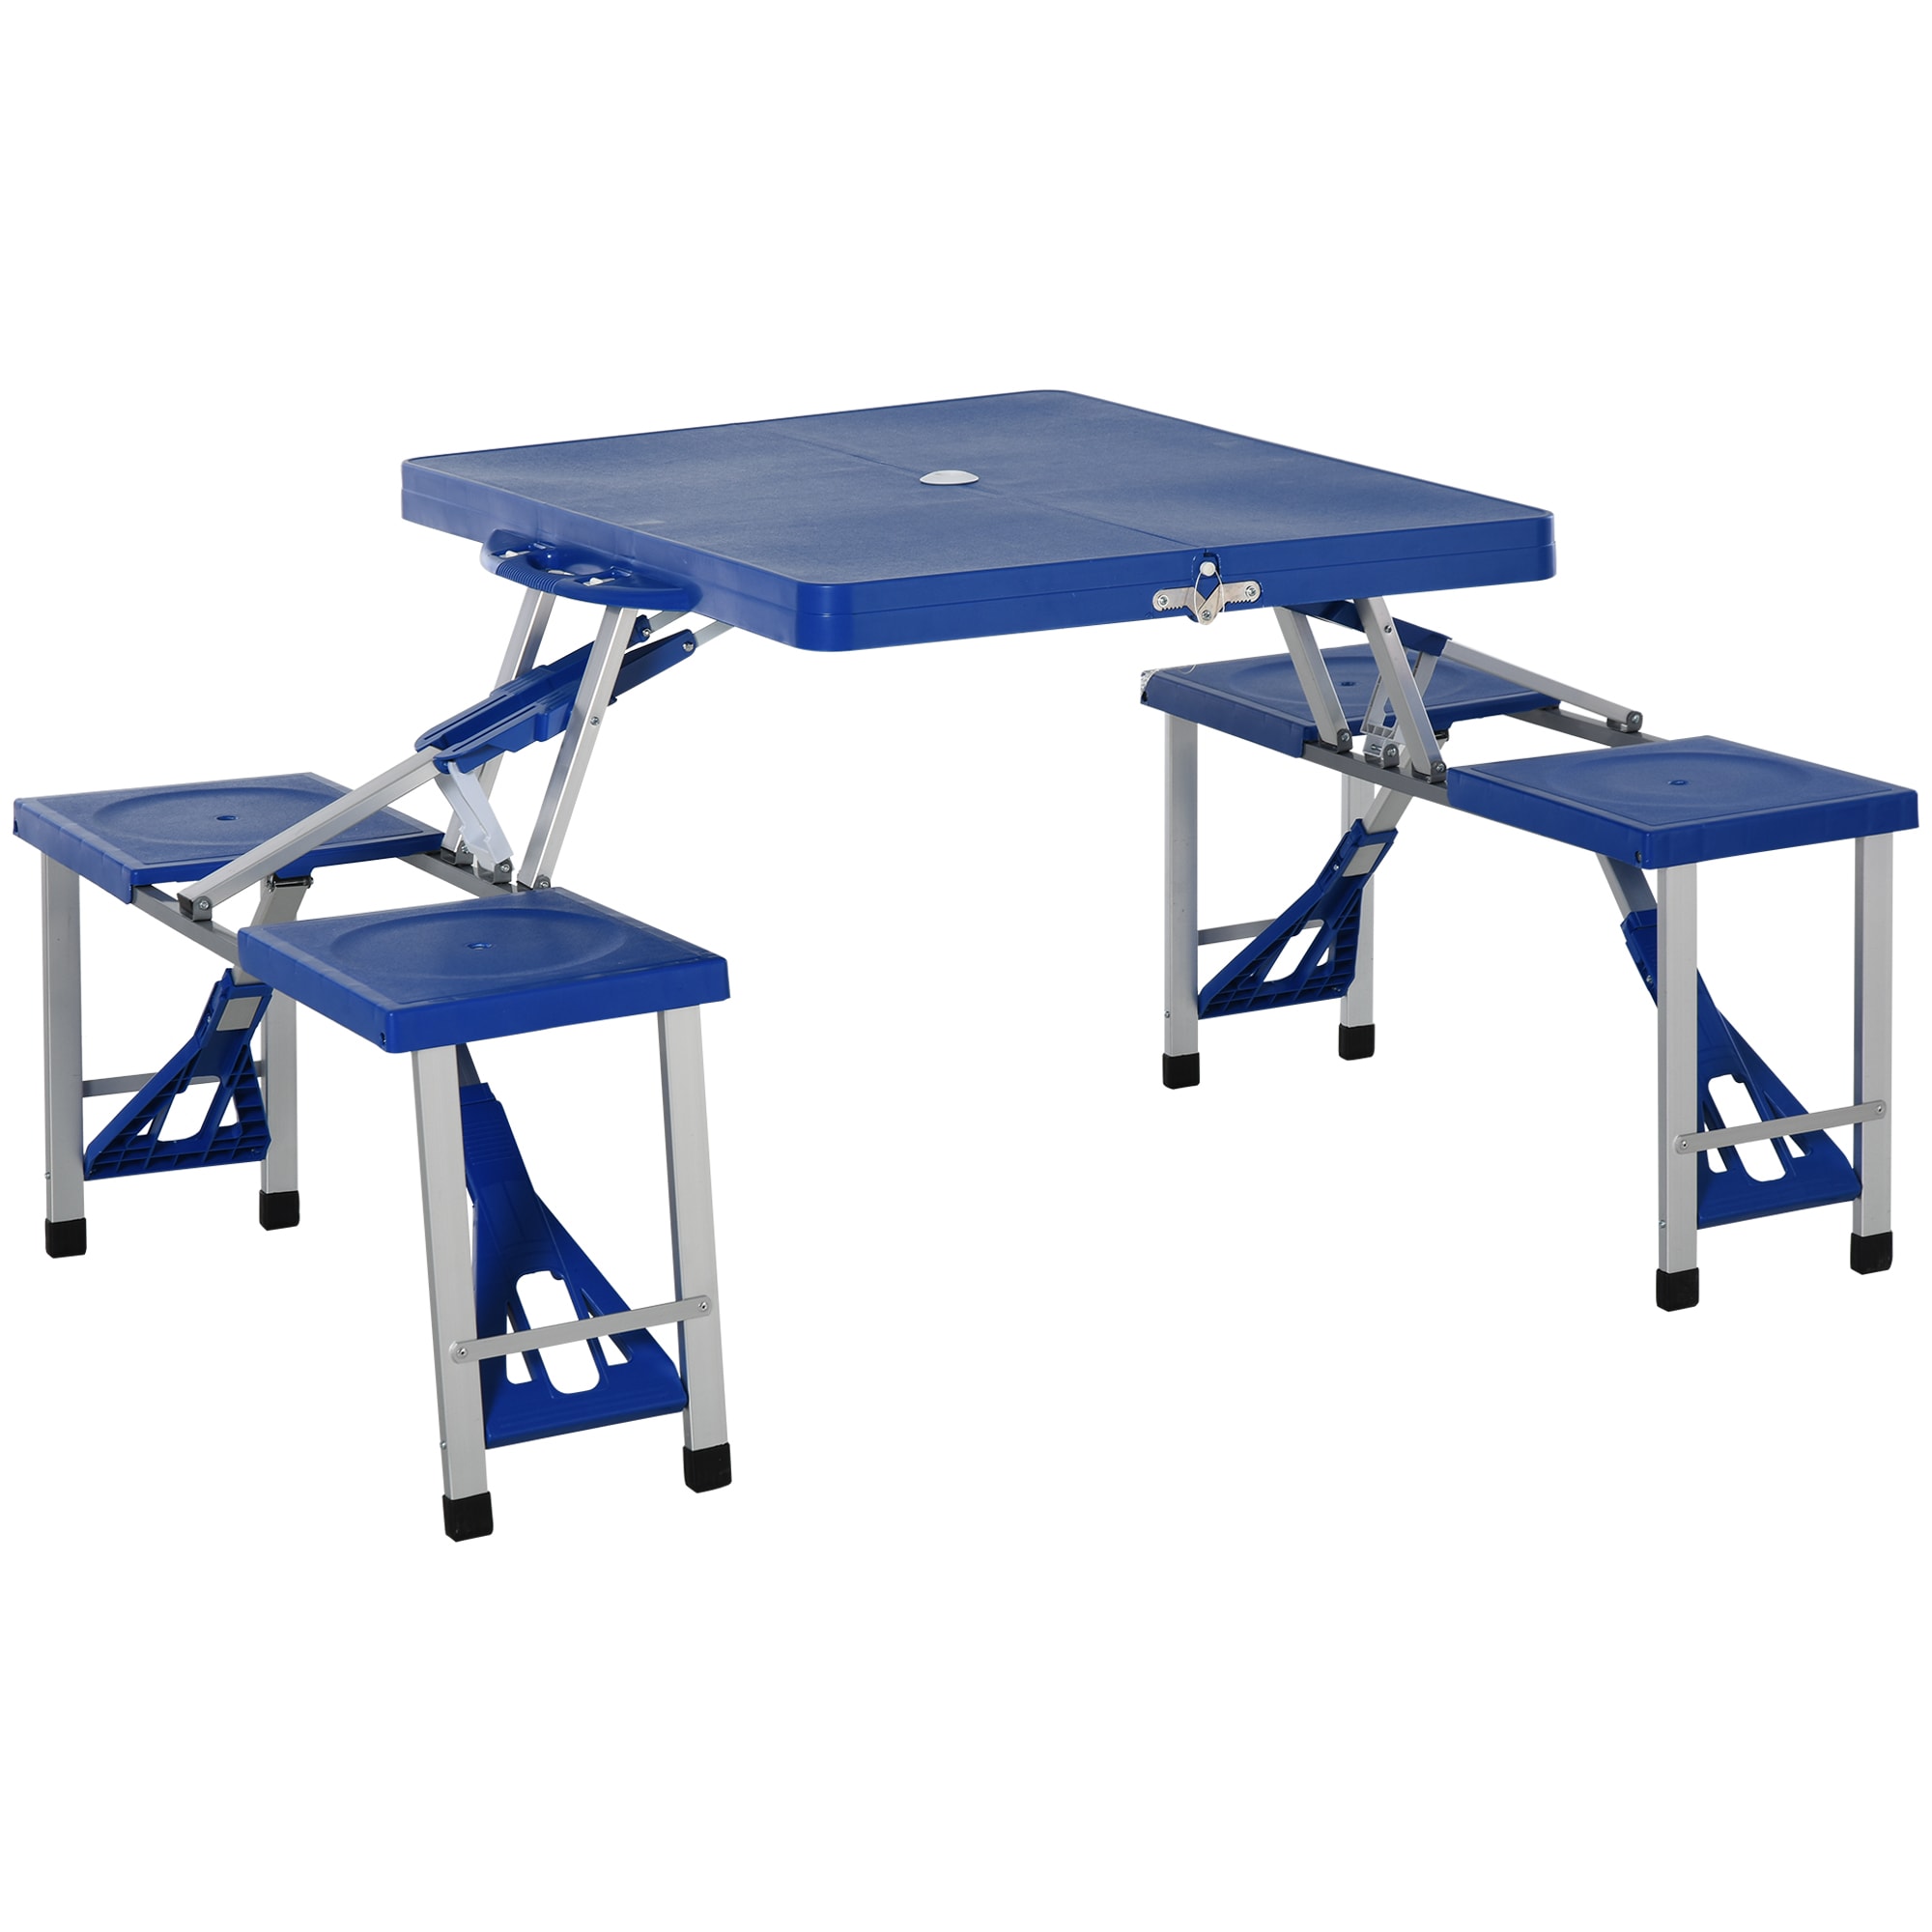 Portable Folding Table Desk Picnic Camping Outdoor Collapsible Table Lightweight 